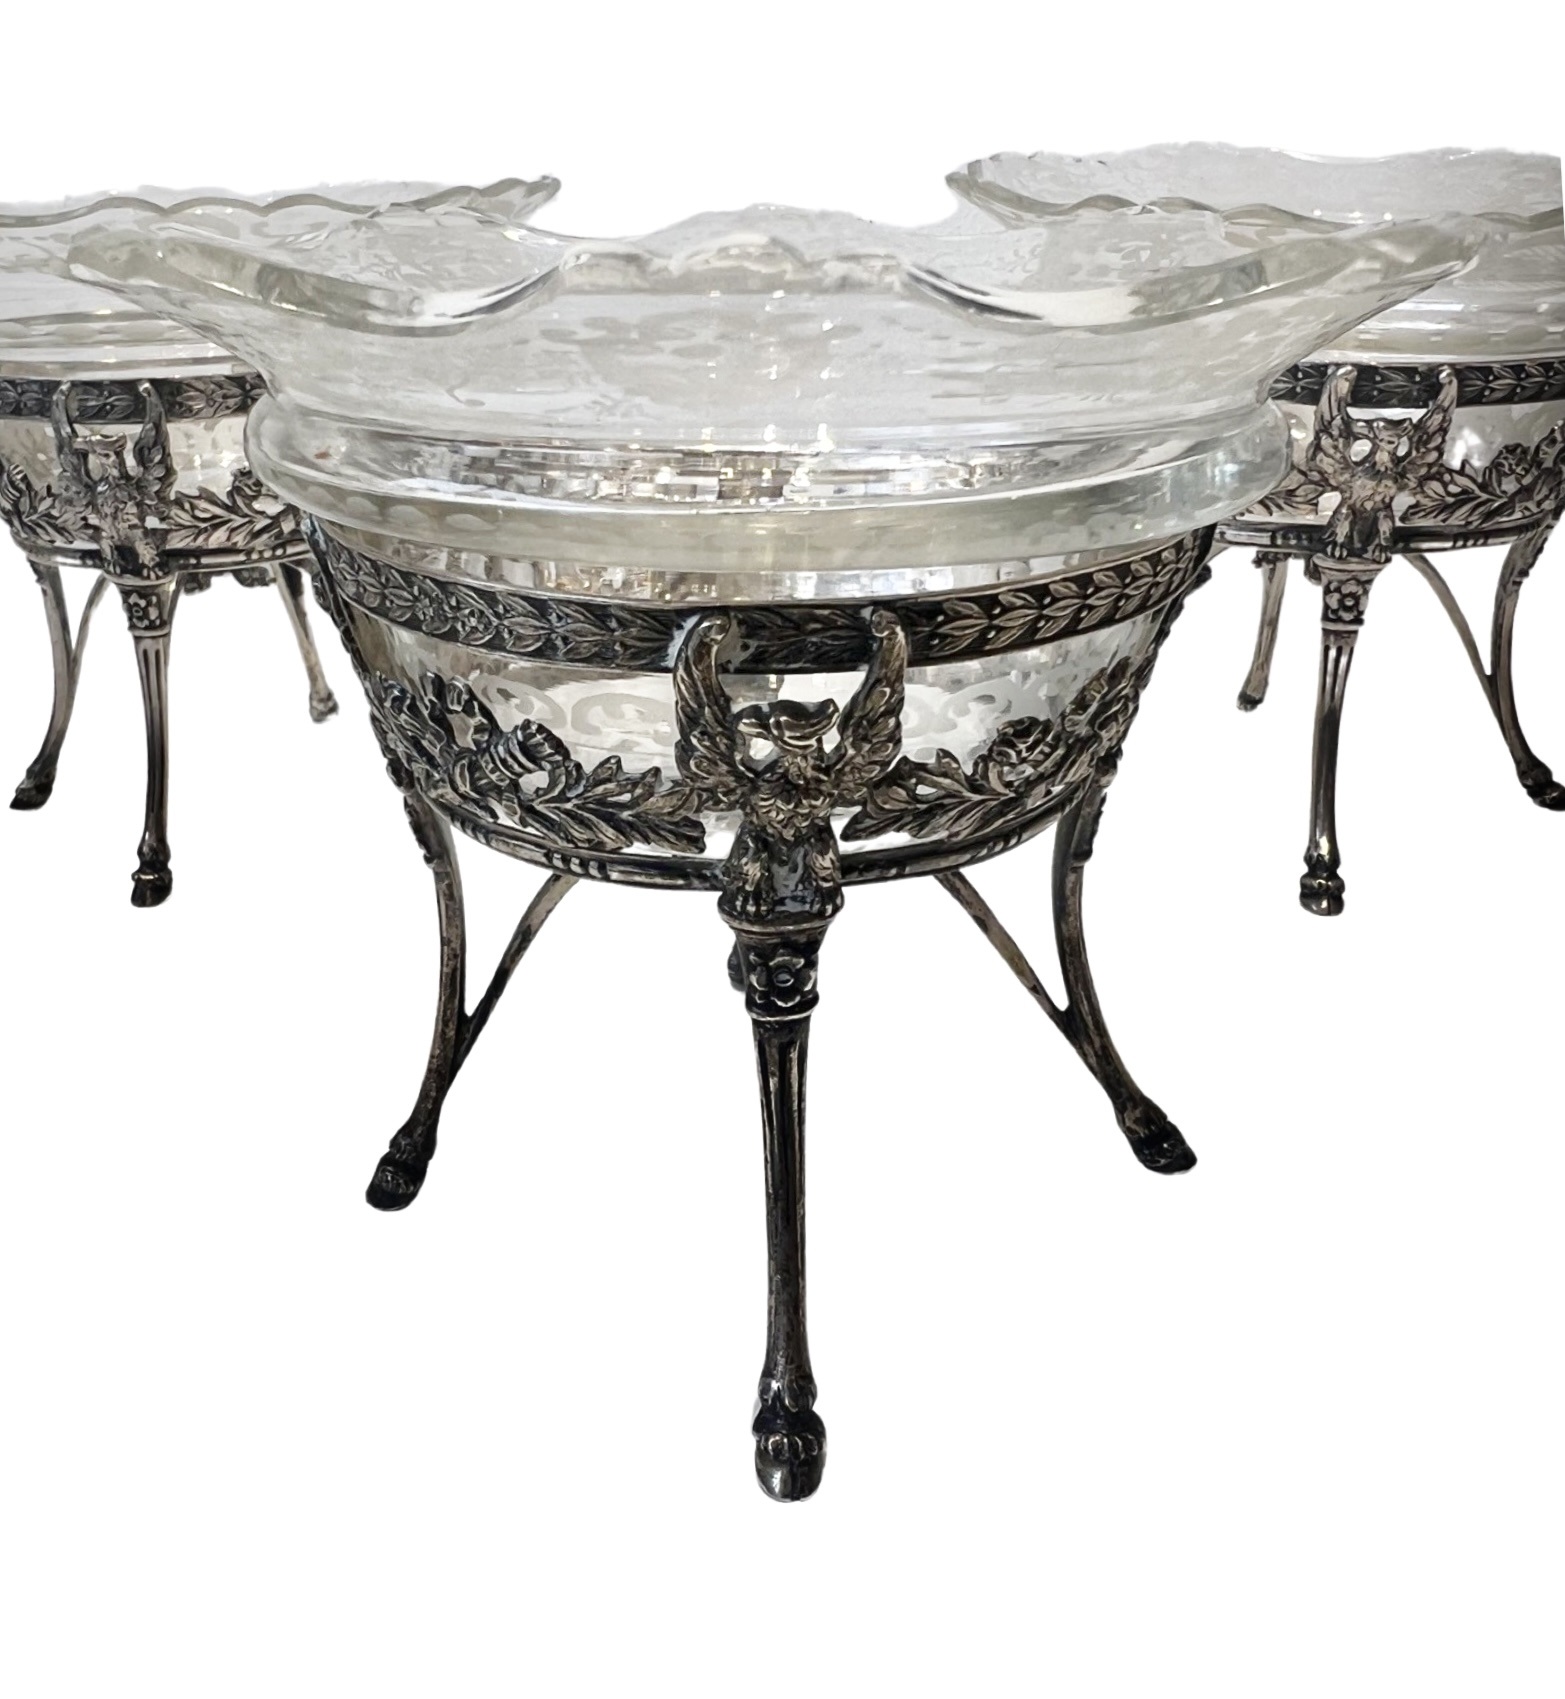 A SET OF FOUR SILVER AND CUT GLASS SWEETMEAT BASKETS, POSSIBLY GERMAN, C. 1860 - Image 4 of 4